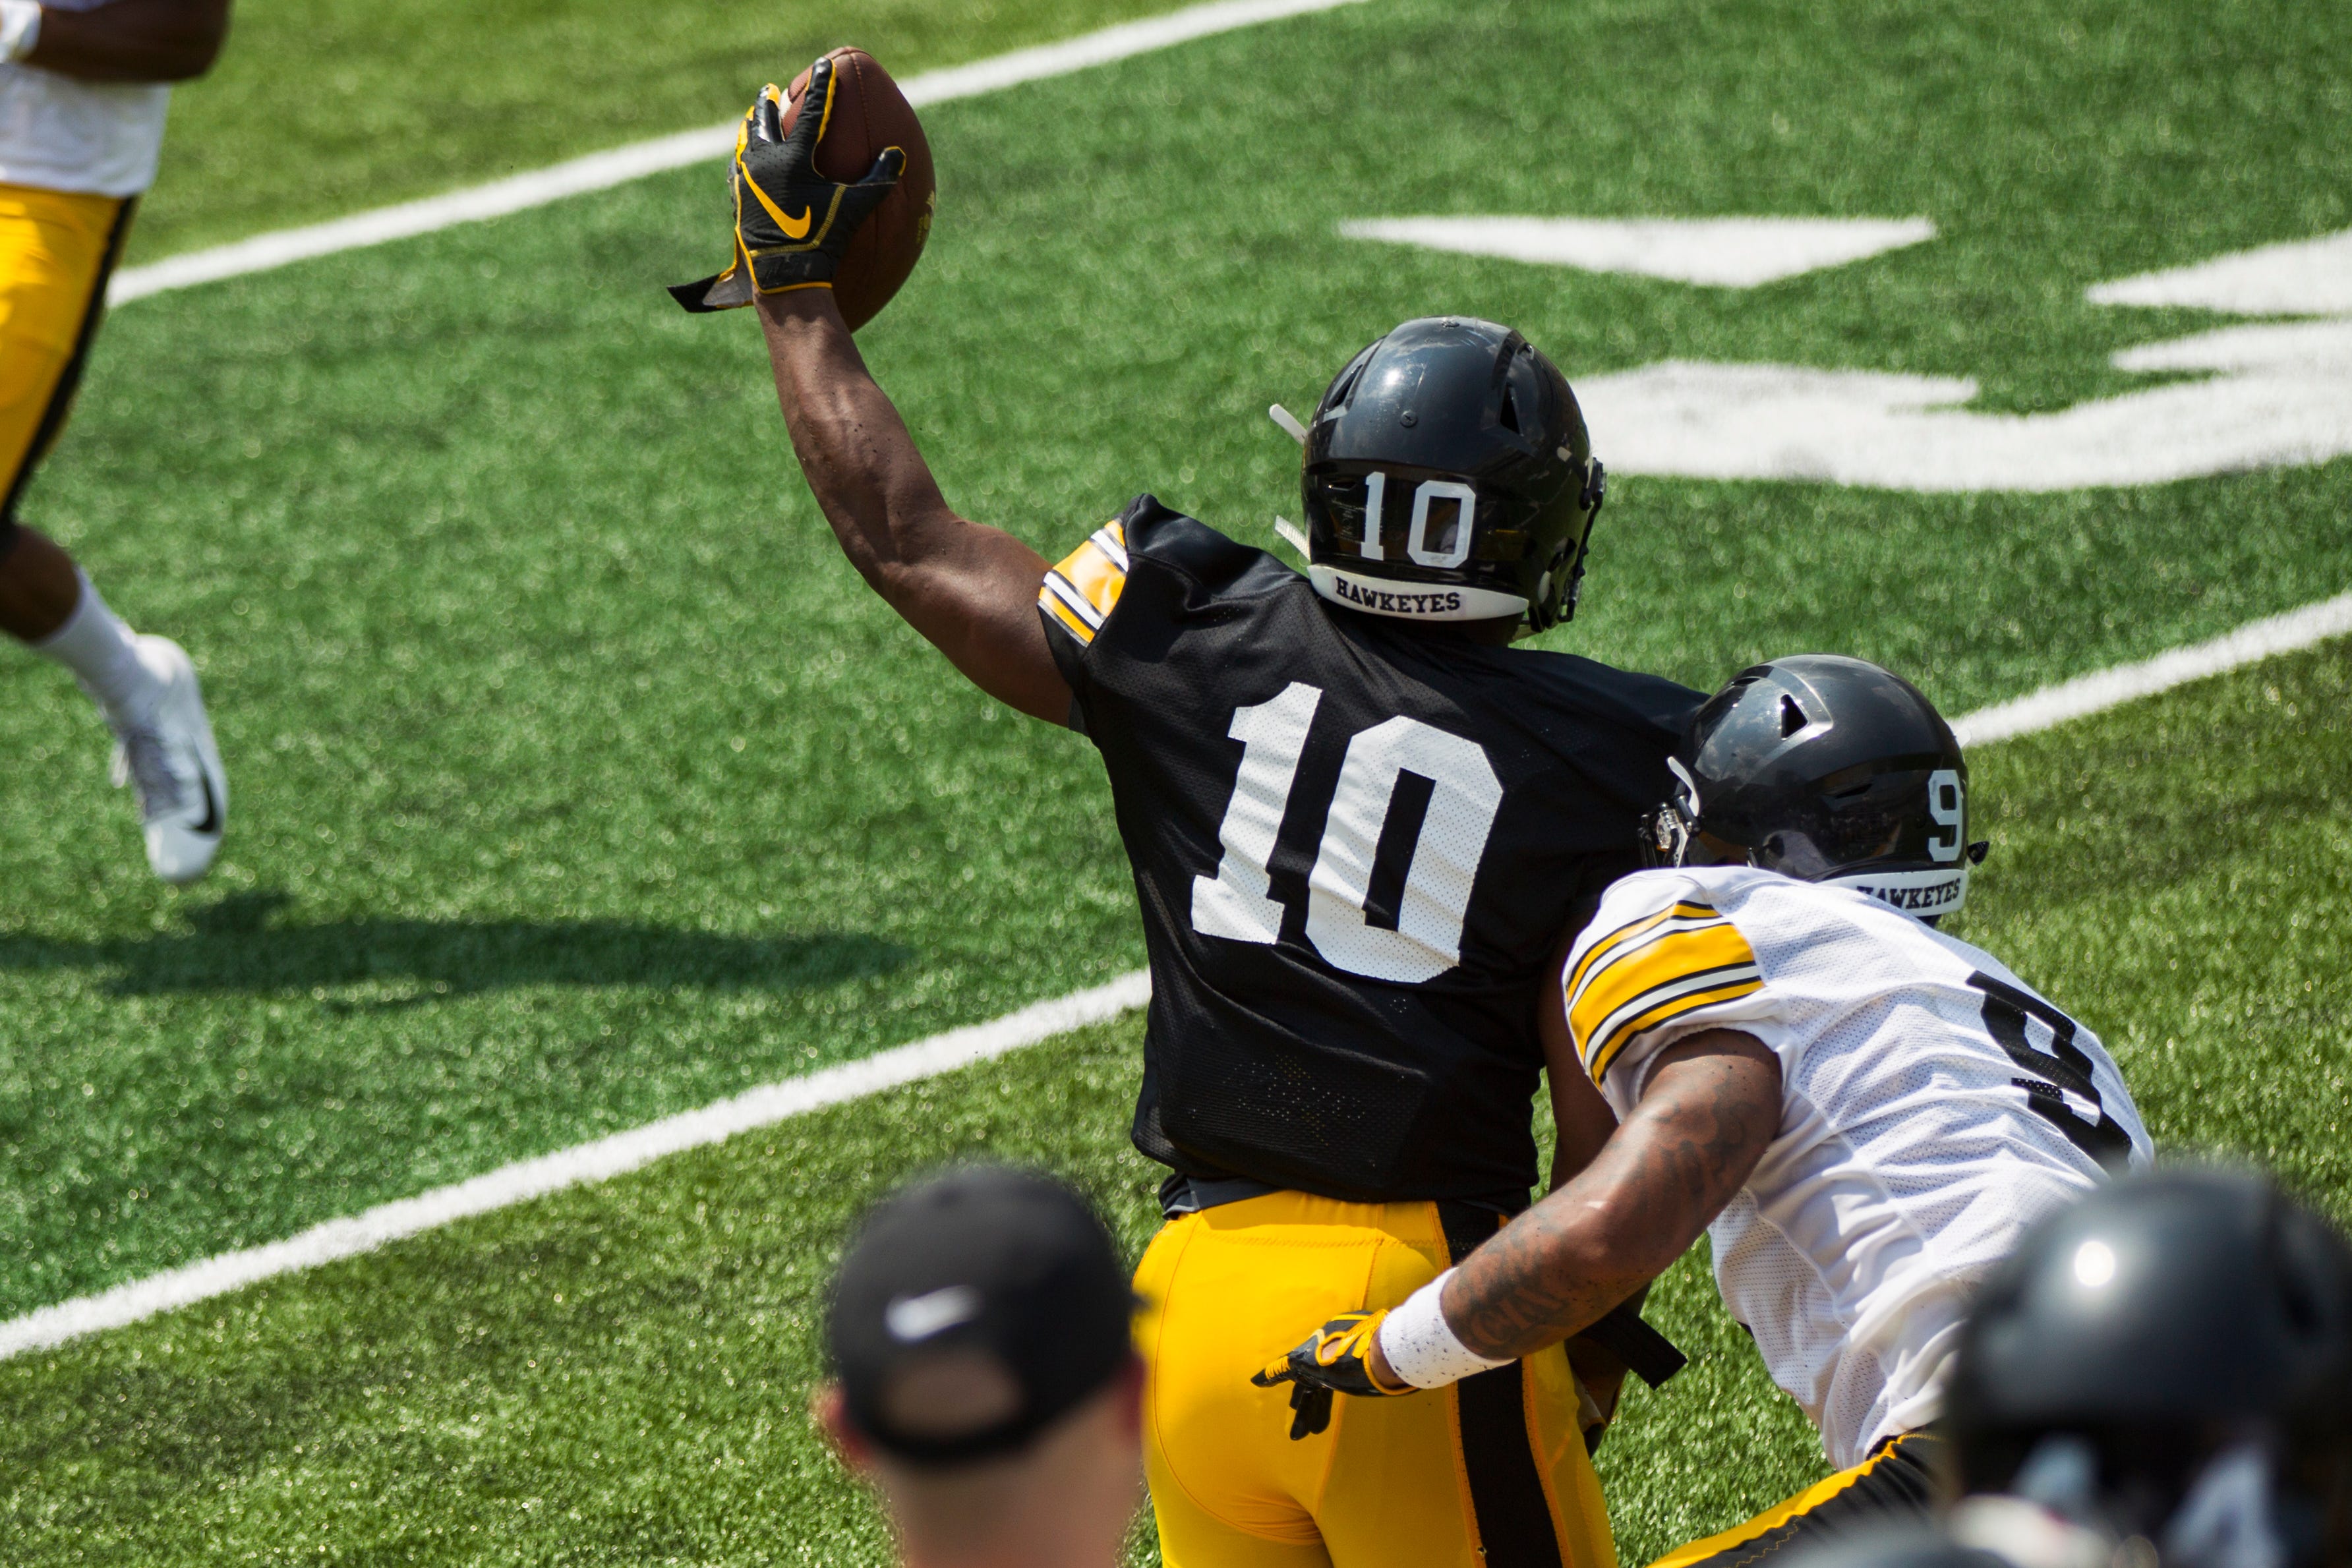 Iowa running back Mekhi Sargent holds a ball in the air after pulling a reception during a Kids Day practice on Saturday, Aug. 11, 2018, at Kinnick Stadium in Iowa City.